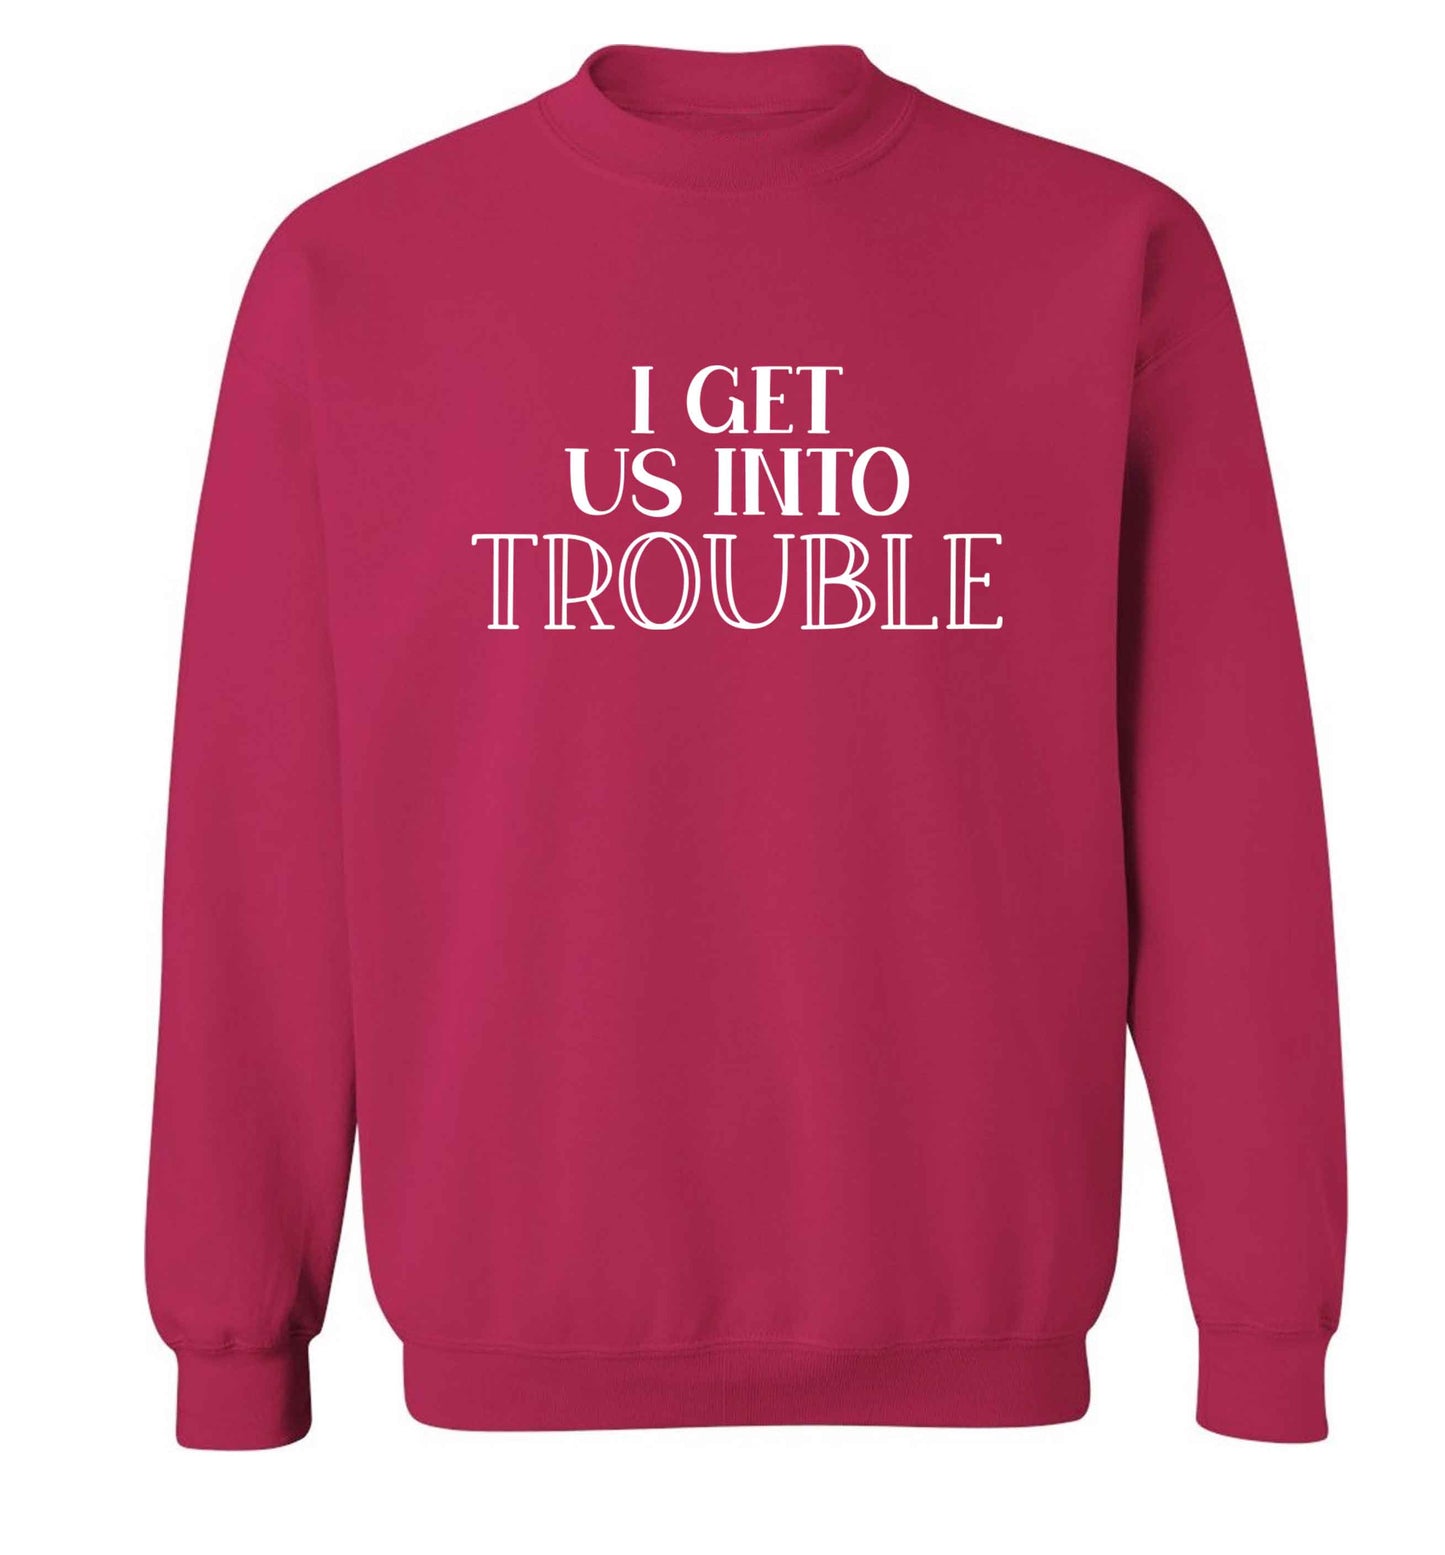 I get us into trouble adult's unisex pink sweater 2XL